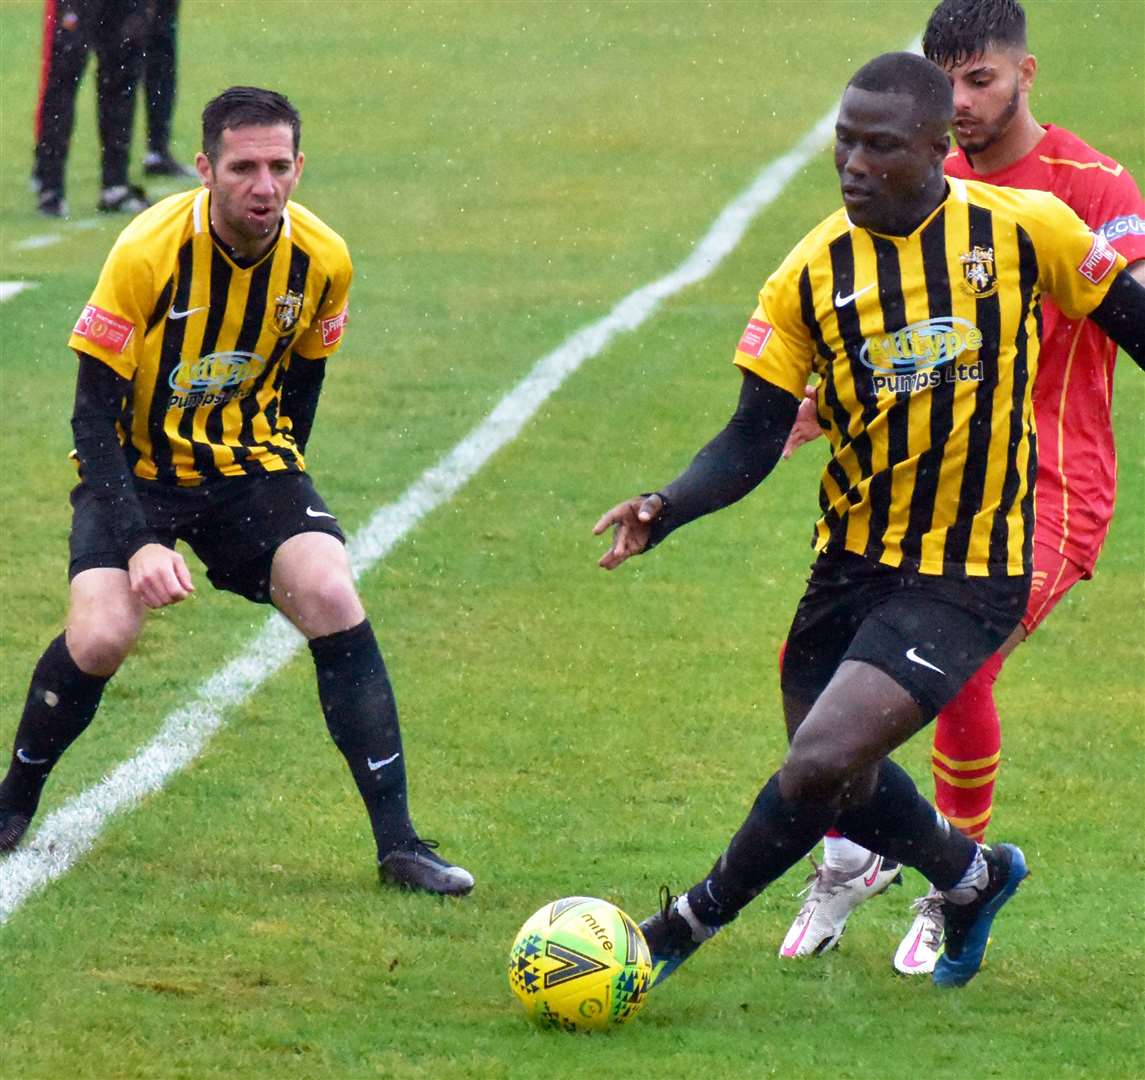 Folkestone scorer Ade Yusuff on the ball during his team's win against Gloucester City with team-mate Draycott in support. Picture: Randolph File